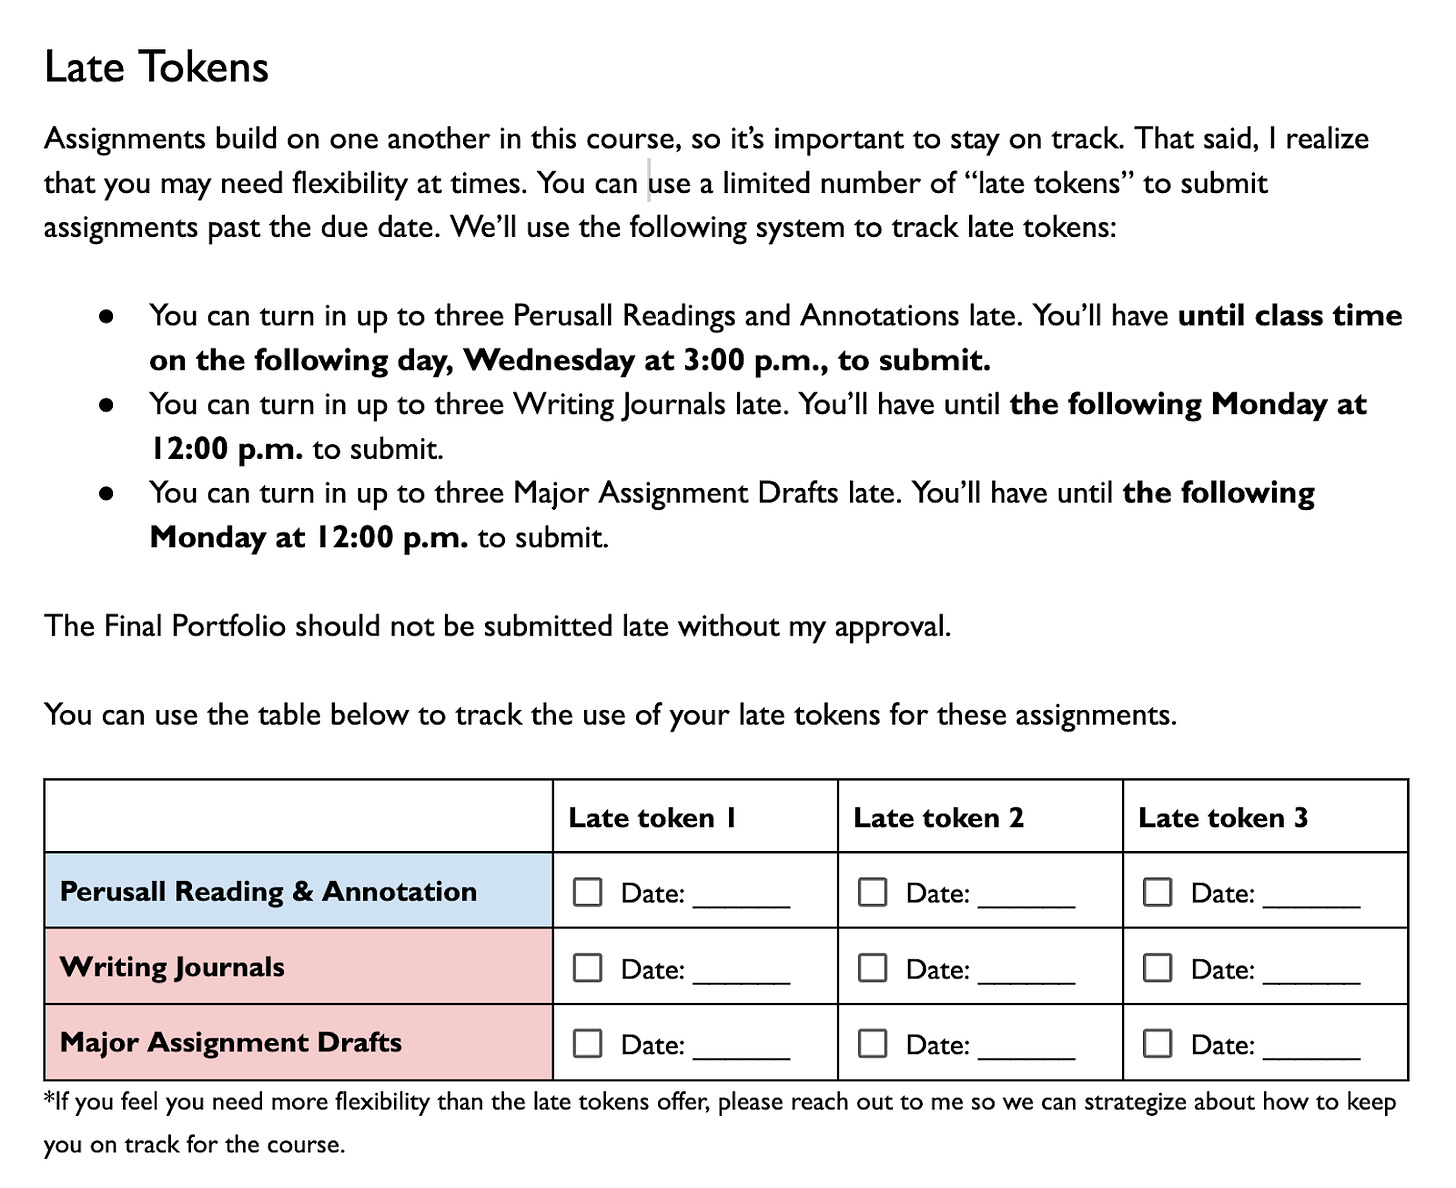 Screenshot of instructions for students about how to use the late tokens, along with a table they can fill in to check off late tokens as they use them.